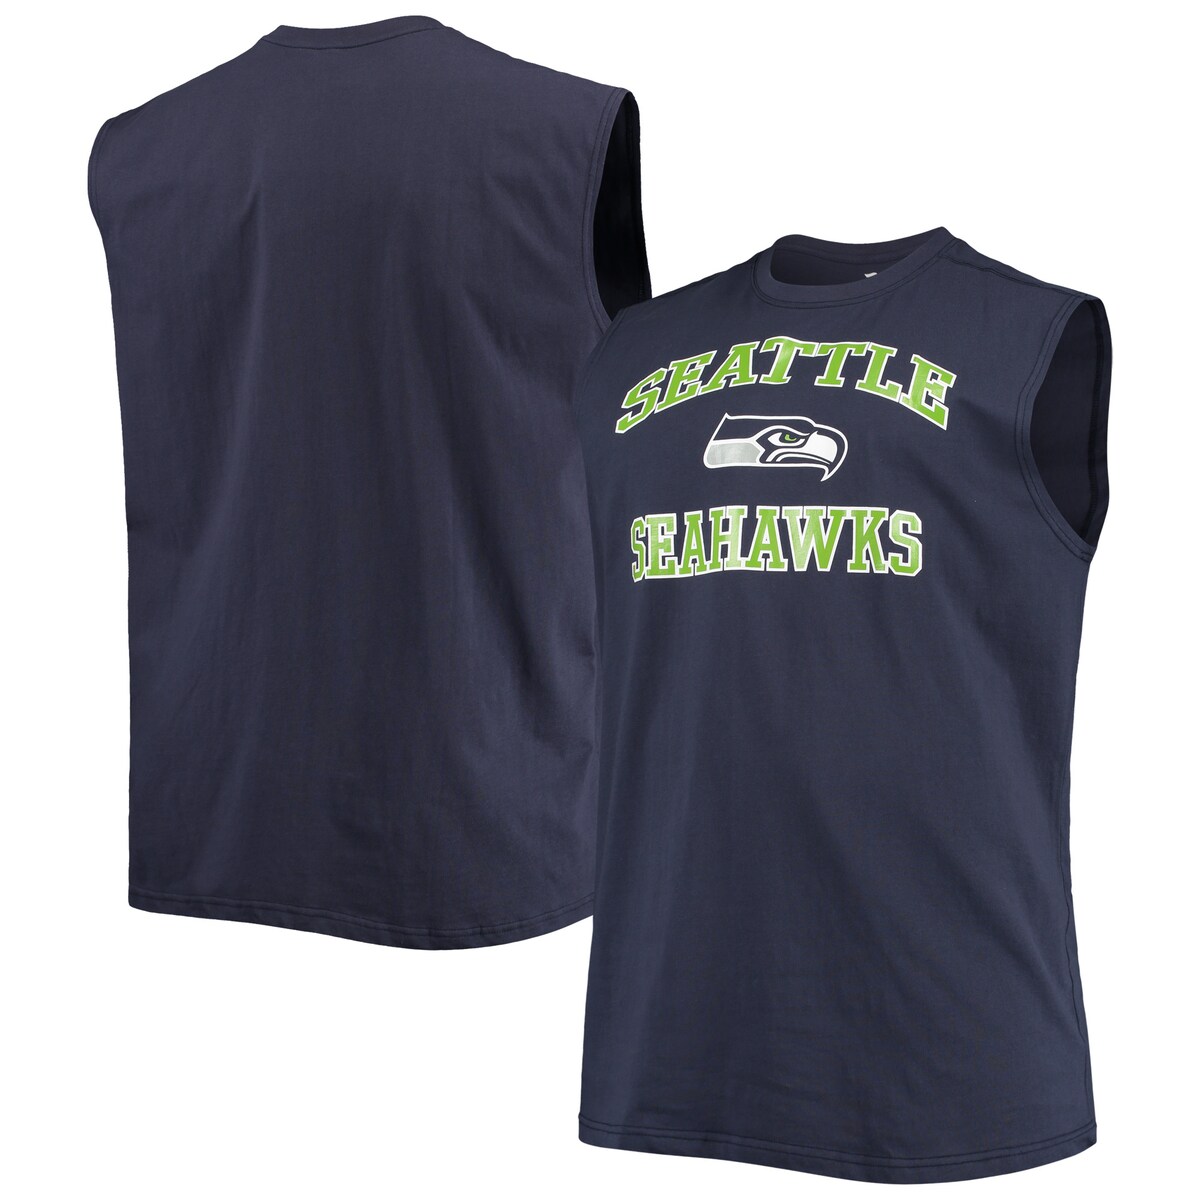 Pick up this Seattle Seahawks muscle tank top to boast your team pride. Its tagless collar and sleeveless design offer a light, fresh feel. This tank is suitable for any activity level, whether you're chilling on the couch or training for the next Seattle Seahawks open tryout.Machine wash, tumble dry lowImportedScreen print graphicsMaterial: 100% CottonBrand: Fanatics BrandedOfficially licensedCrew neckSleeveless